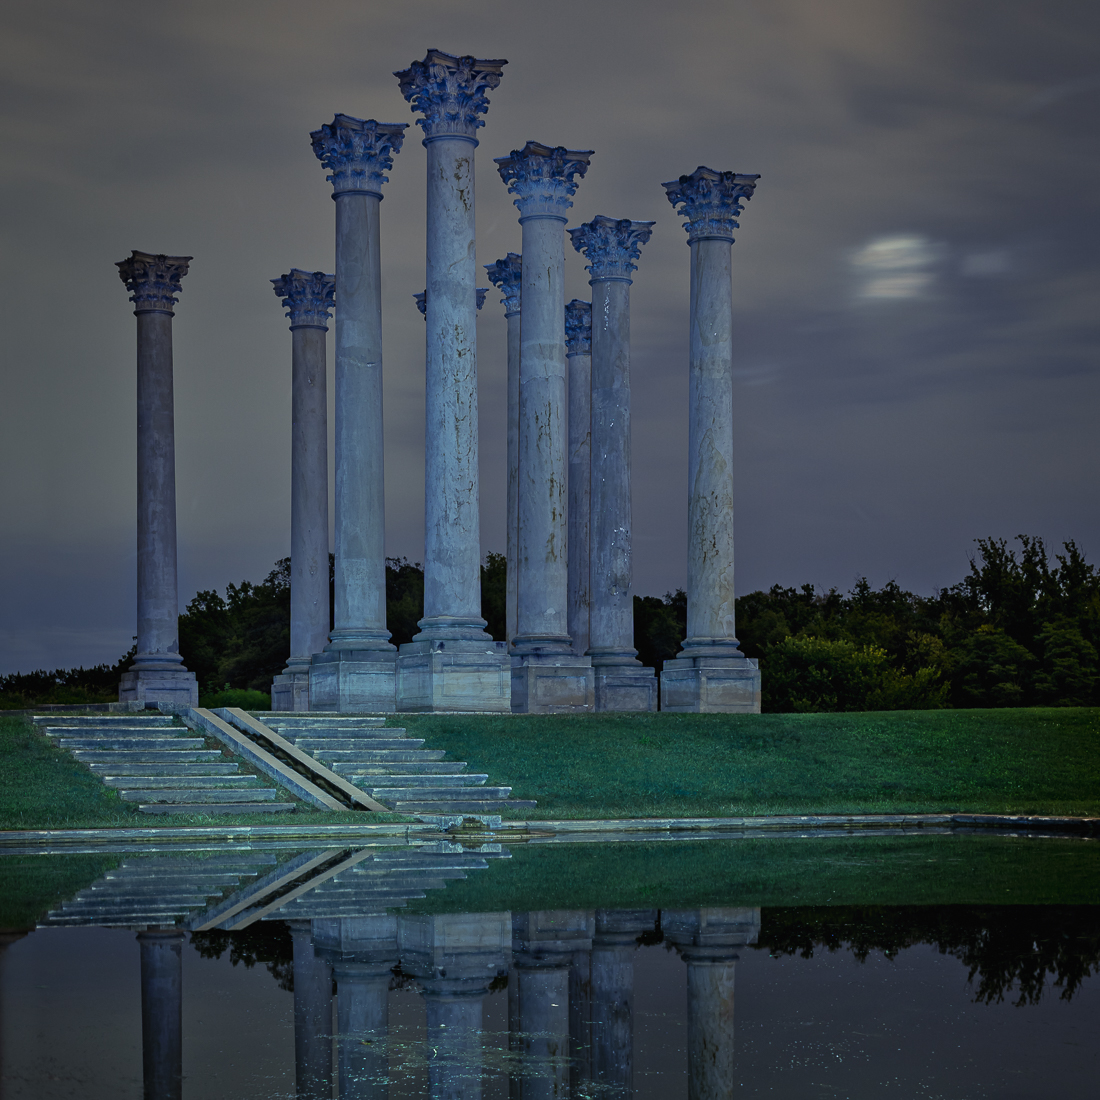 Painting With Light at National Arboretum